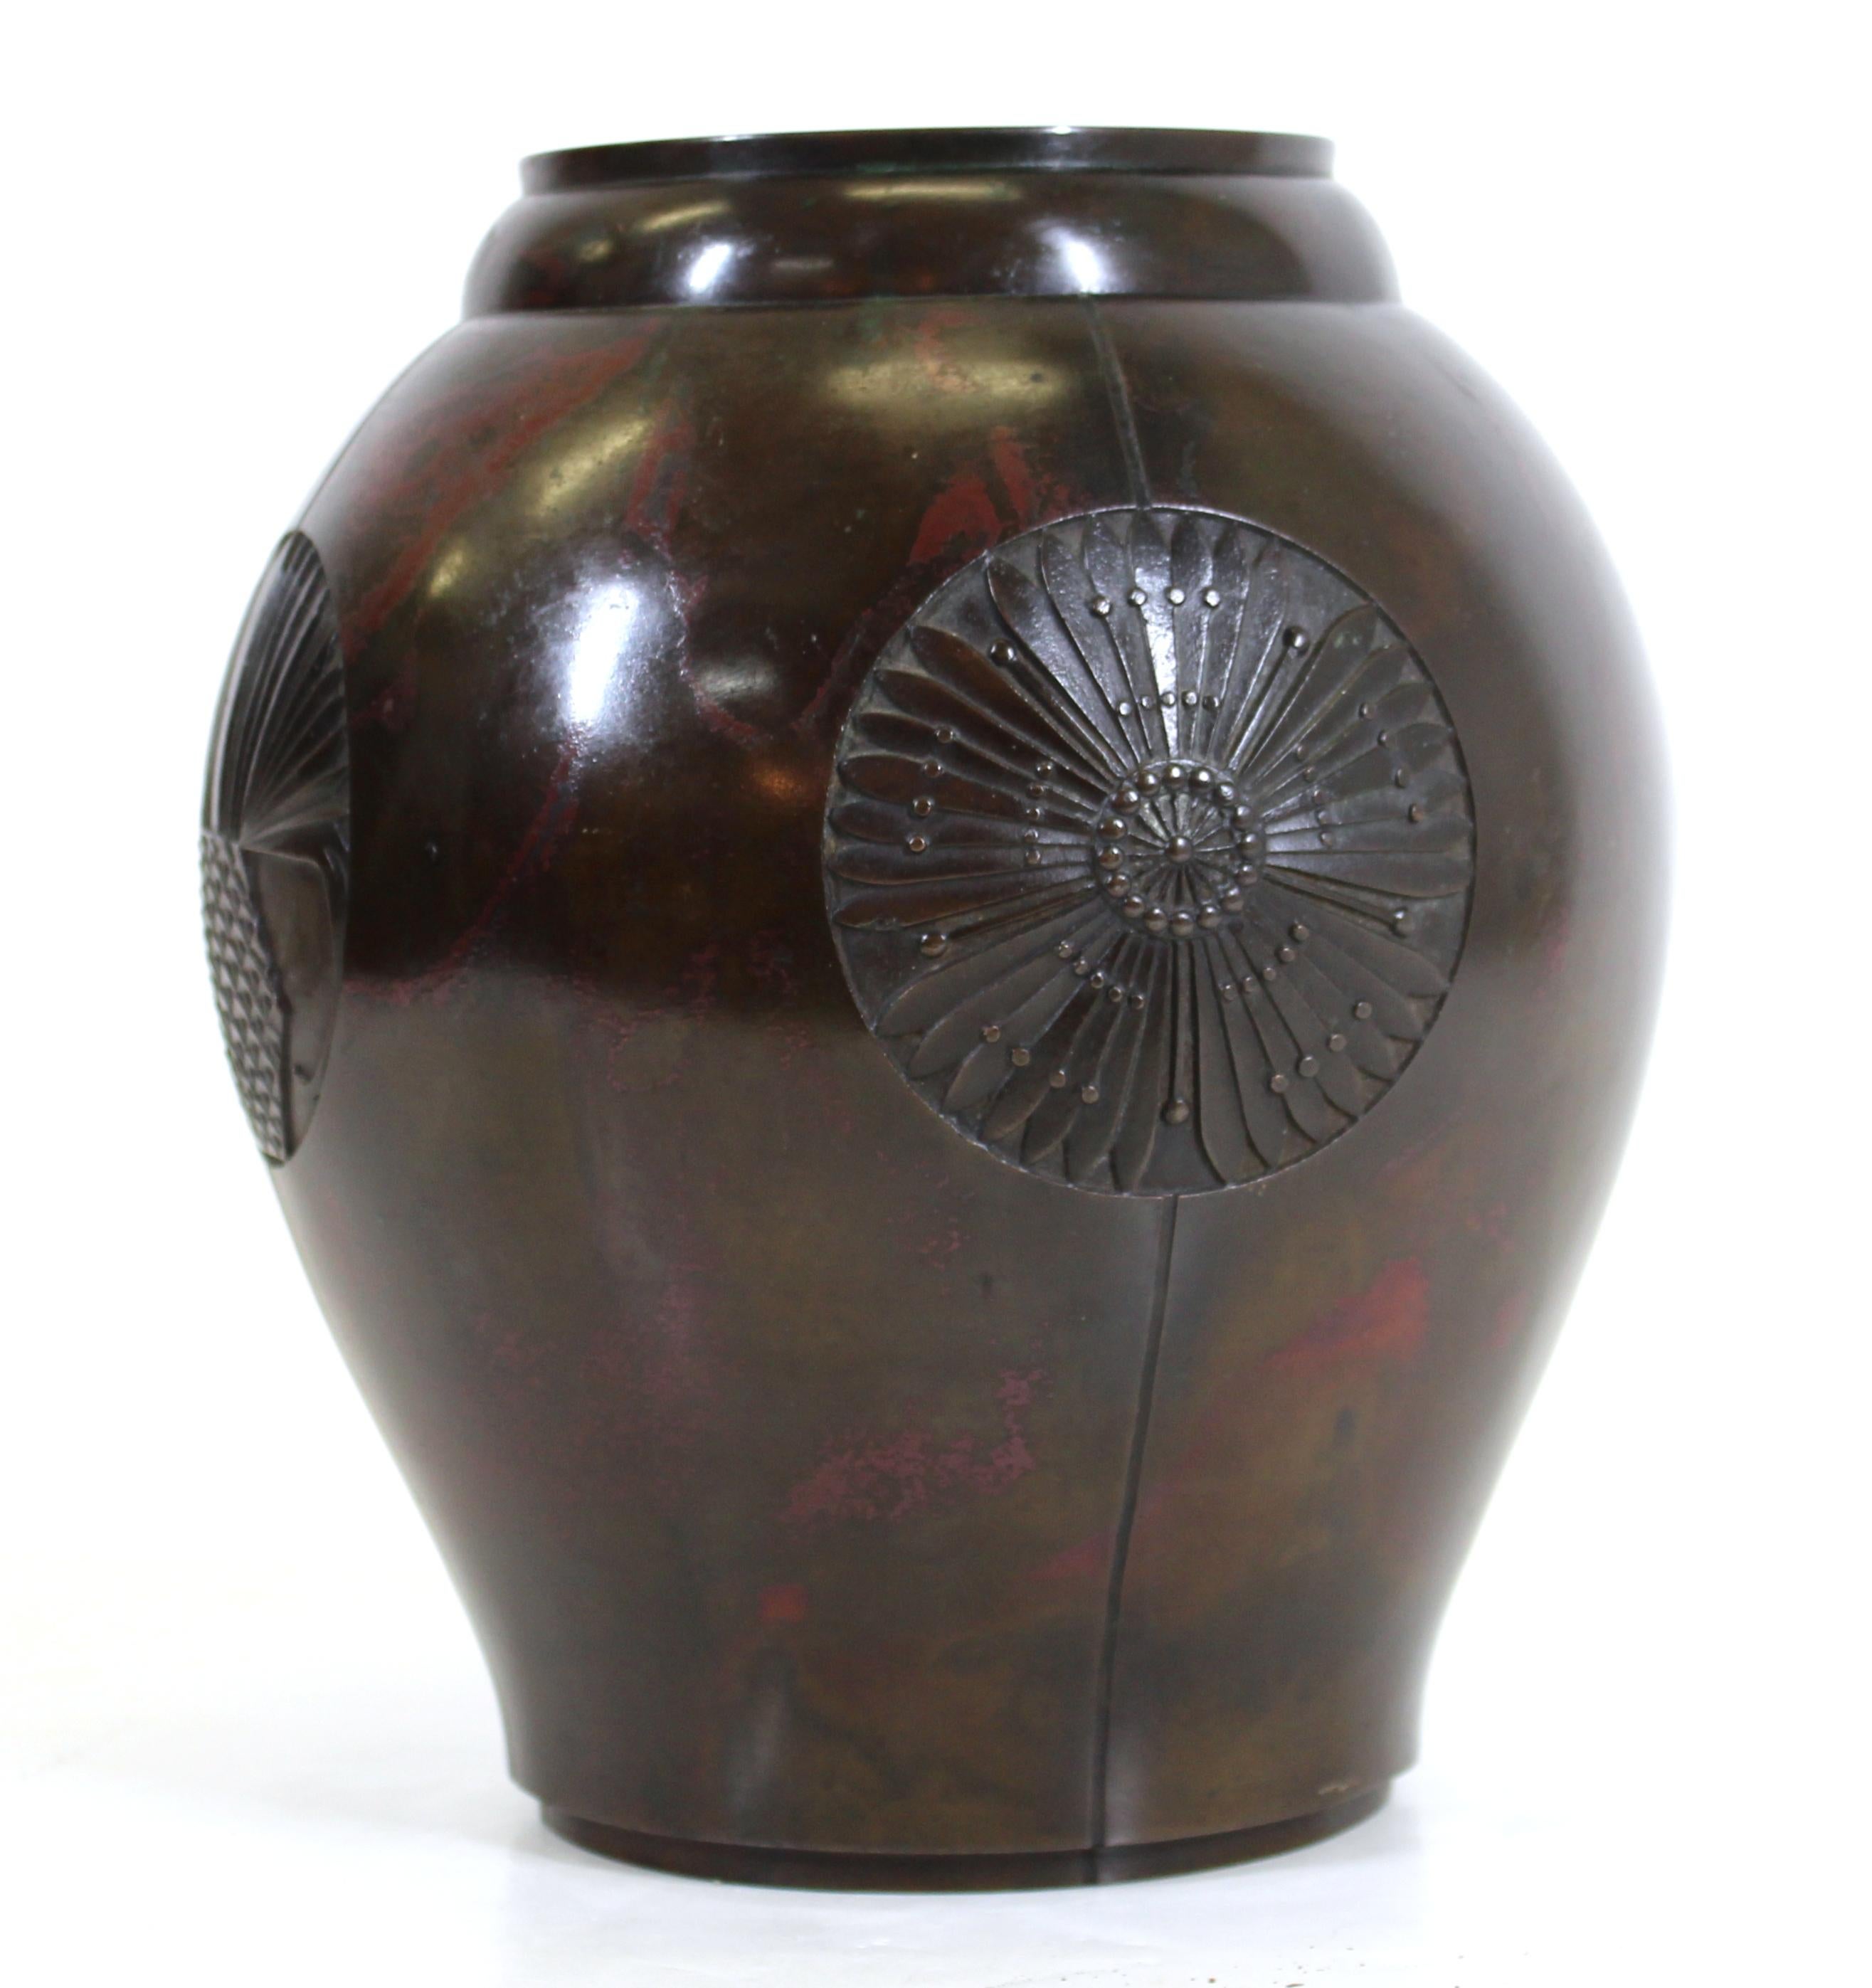 Japanese Art Deco period rare four seasons bronze vase with individual medallions depicting the four seasons, with a rare red swirled through brown patina.